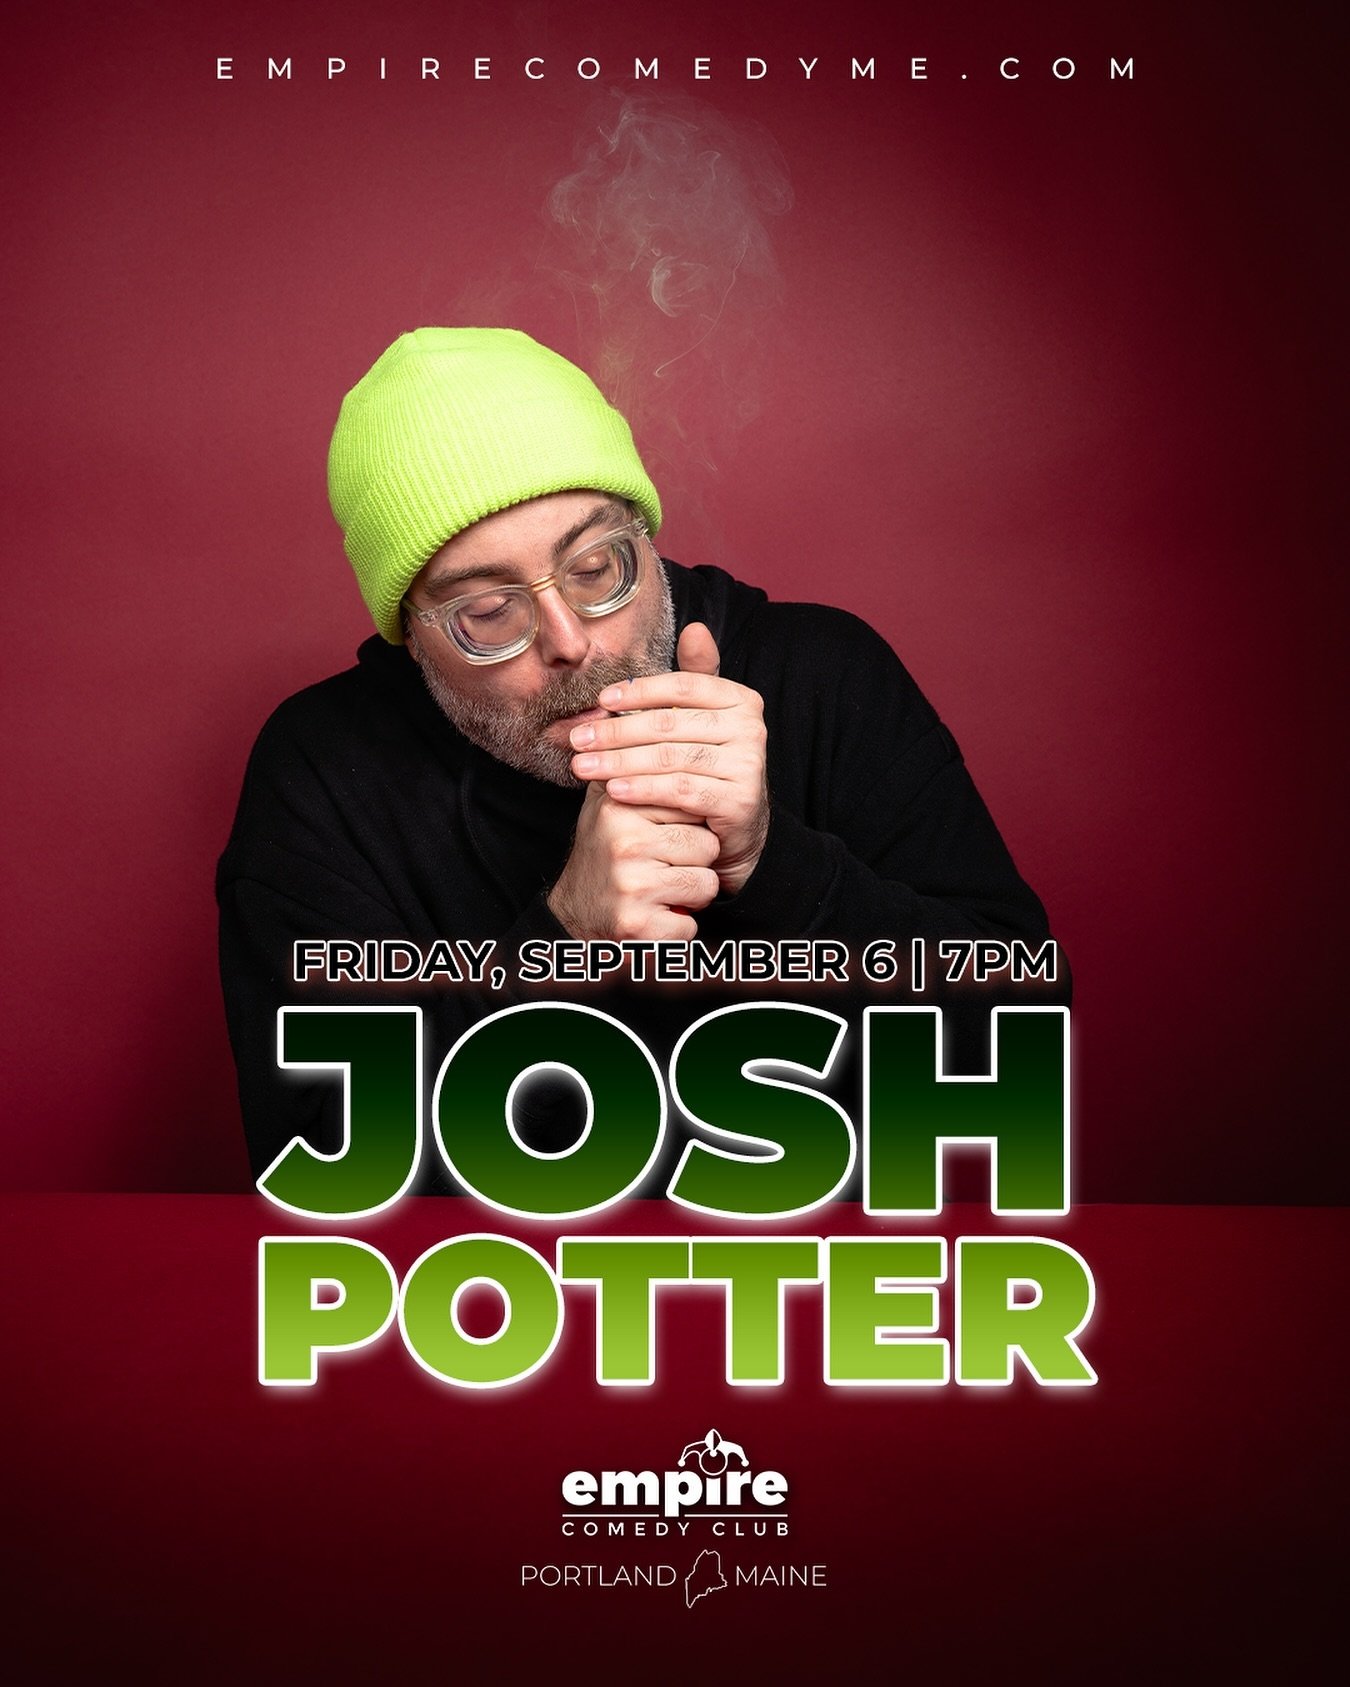 🚨Just Announced🚨 JOSH POTTER on September 6th at 7pm! - On Sale Now! Tickets @ link in bio 🎟️
&bull;
#empirecomedyclub #comedyclub #maine #portlandmaine #thingstodoinmaine #comedyinmaine #mainecomedy #comedy #standupcomedy #standup #207 #laughter 